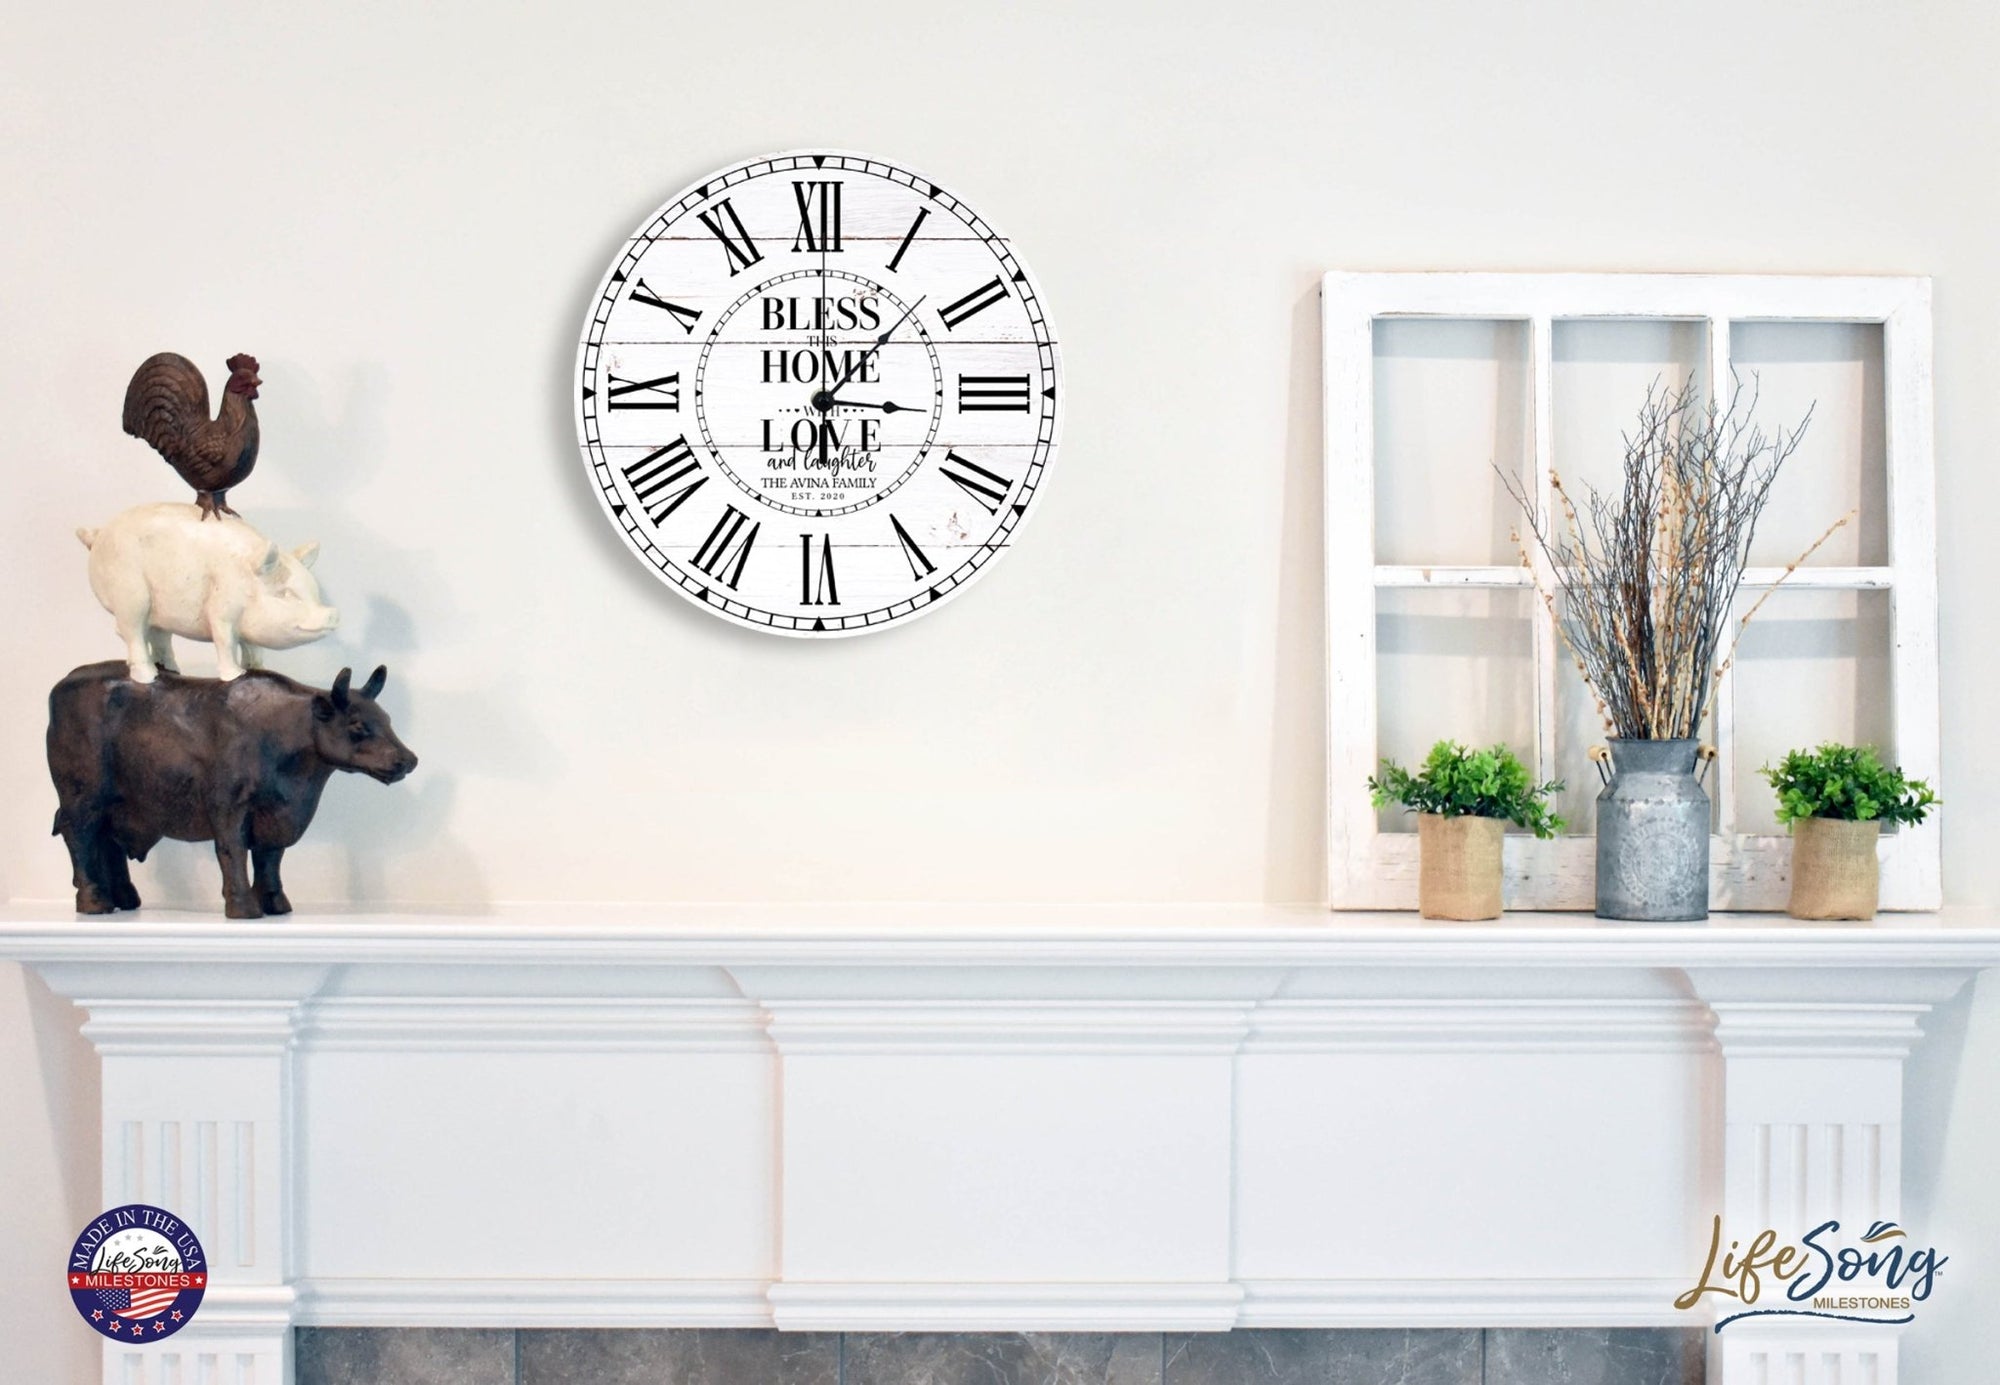 Personalized Inspirational Everyday Home and Family Wall Clock 12 x 12 x 0.125-(Bless This Home) - LifeSong Milestones